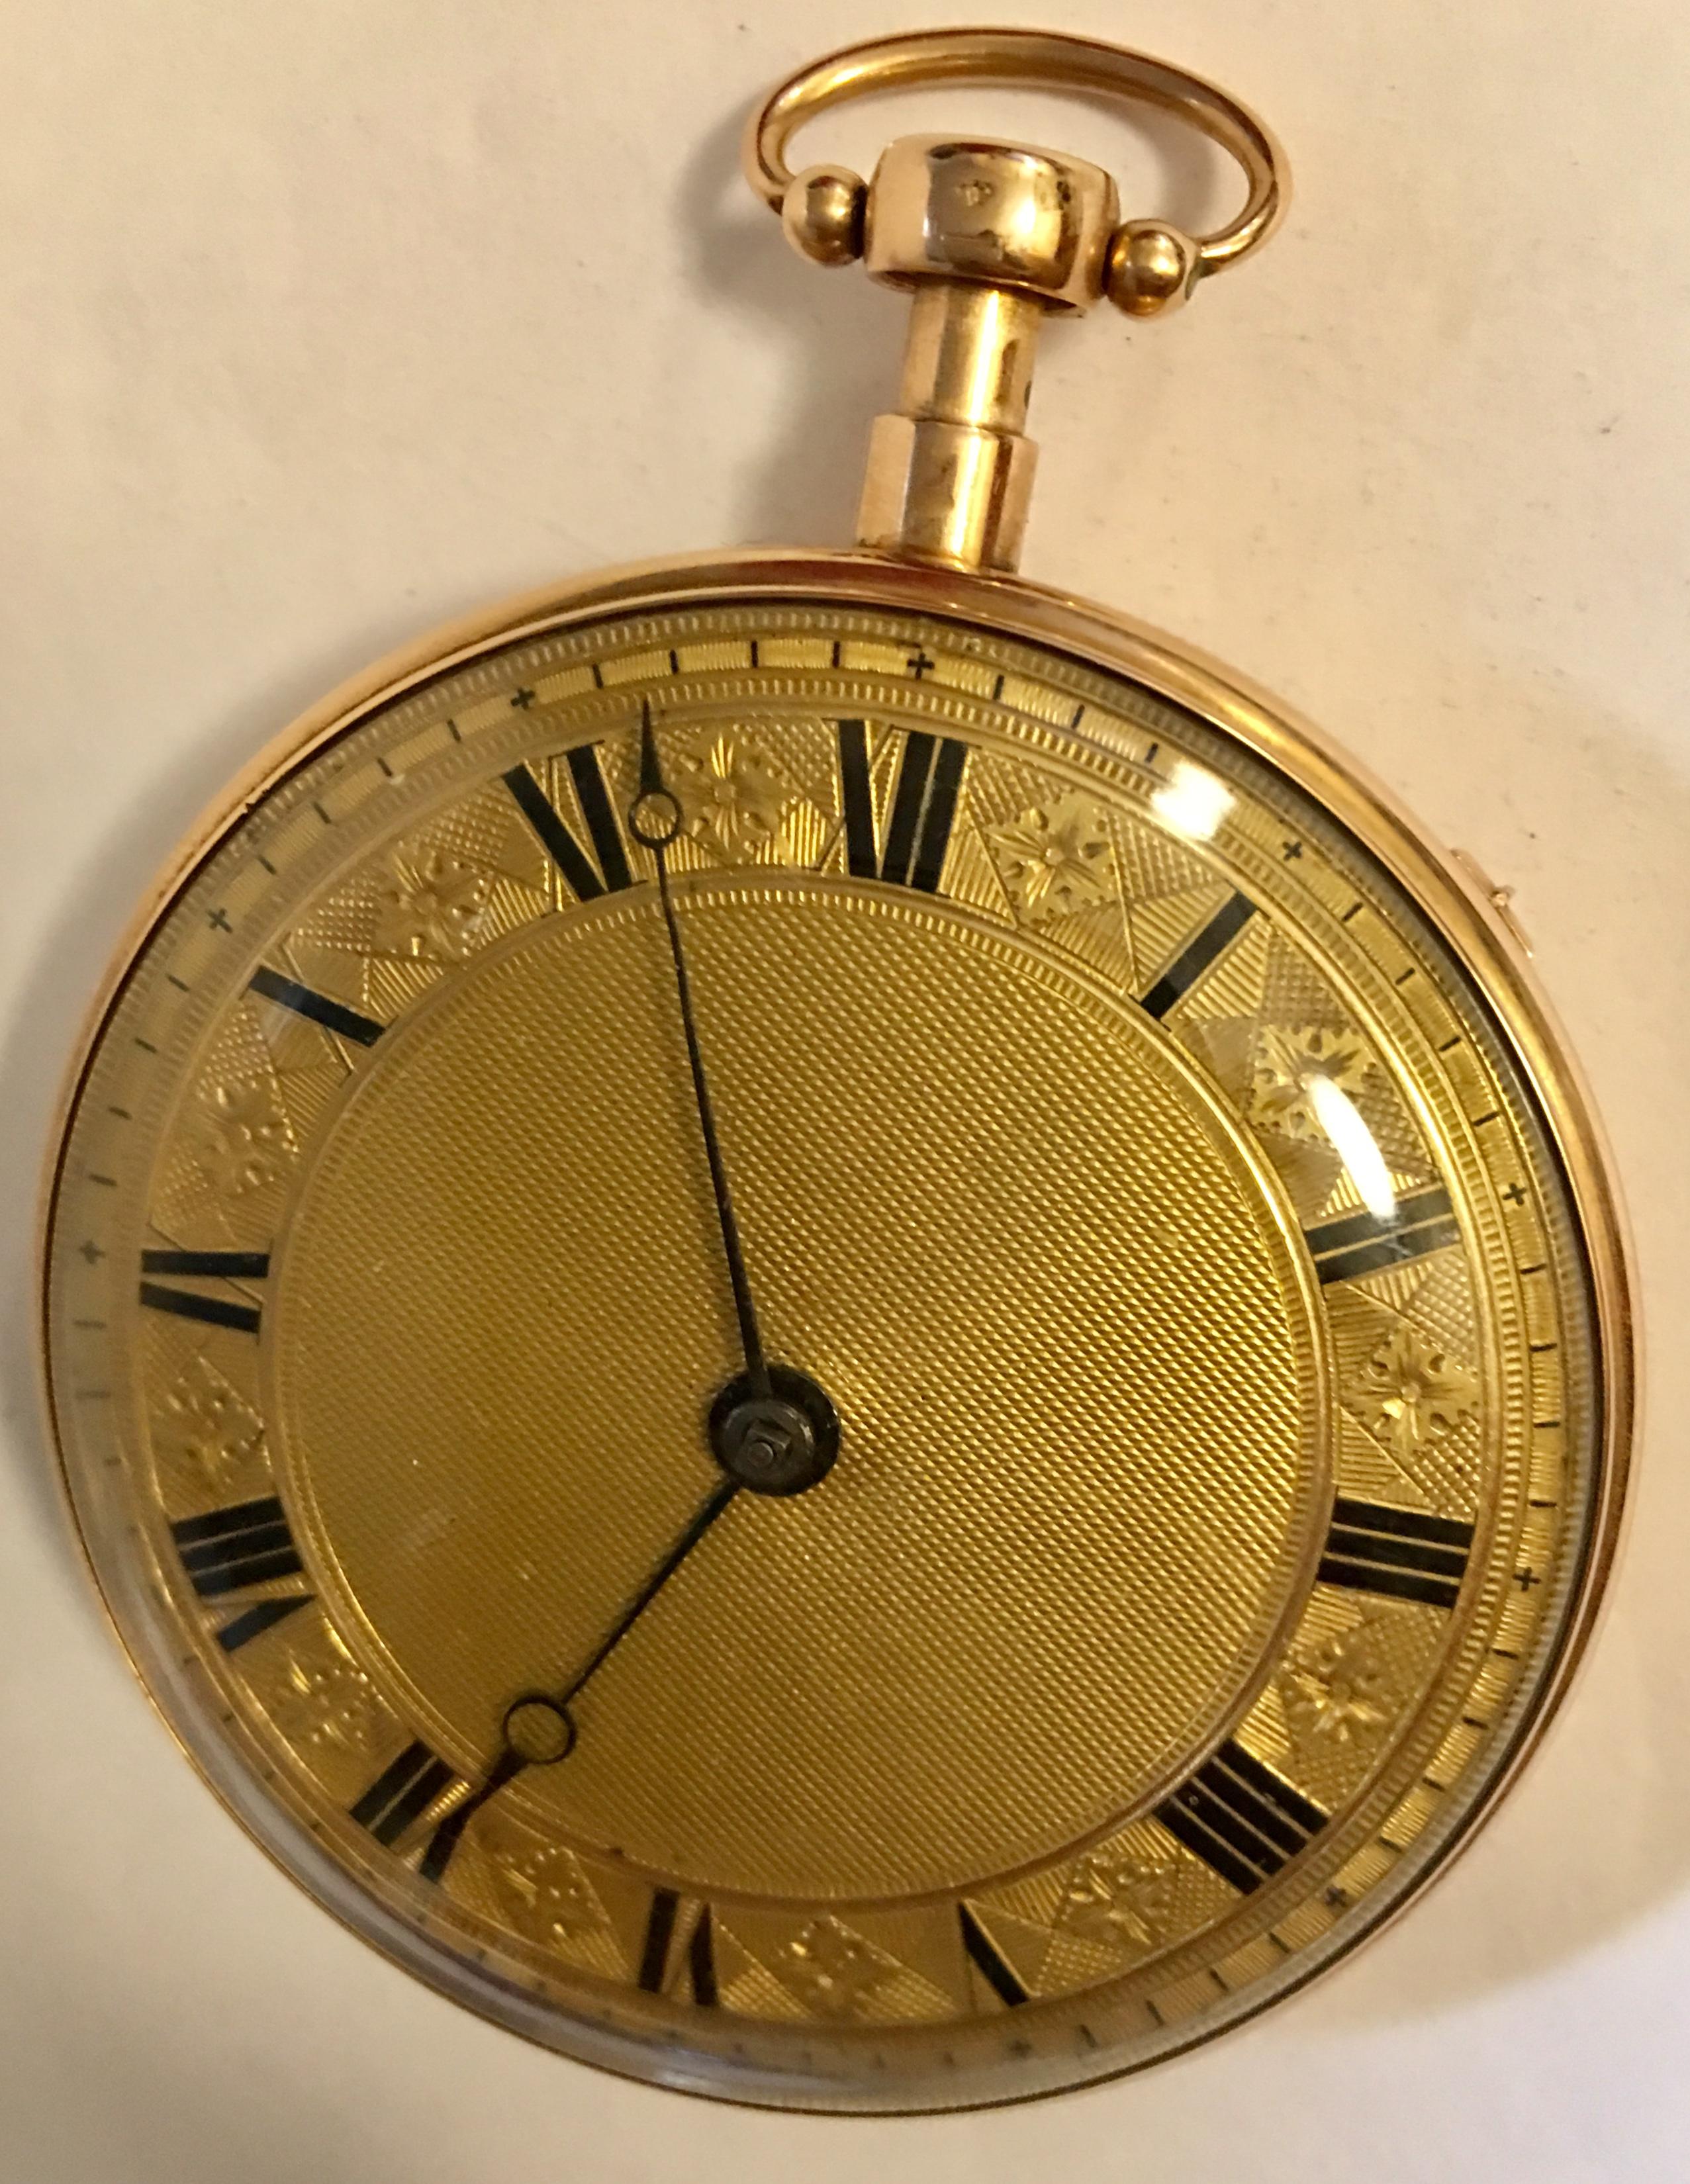 This gorgeous piece is an 18 karat gold verge quarter repeating pocket watch, it has an open face and is key wound. A Very ornate gold dial with black Arabic numerals set on a chapter ring and black steeled hands. It’s 54mm watch diameter and weigh